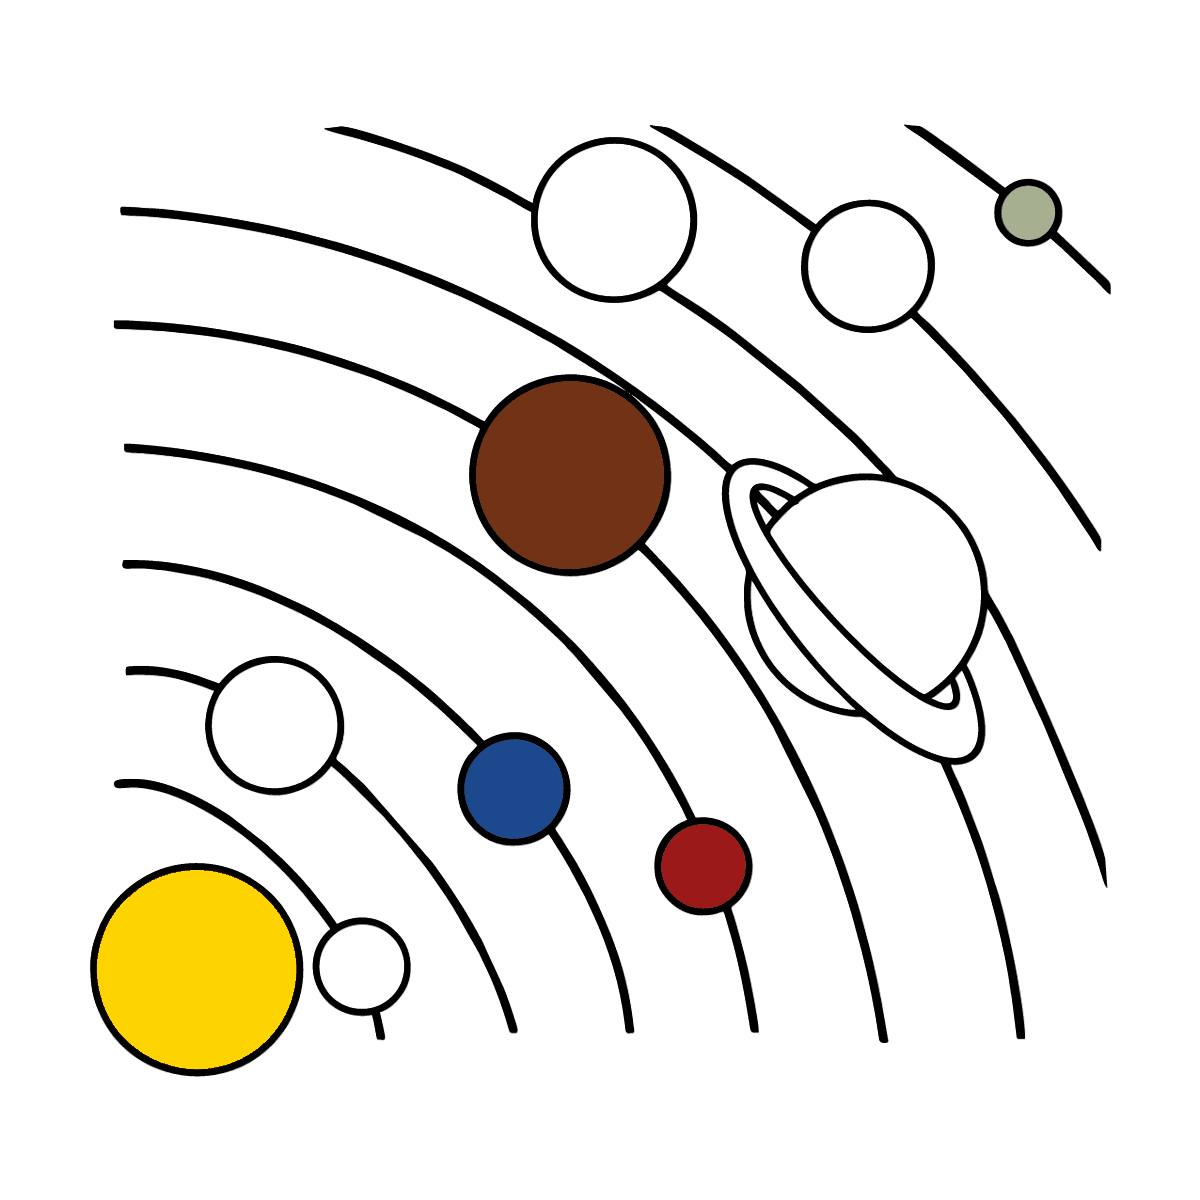 Moon simple solar system Royalty Free Vector Image